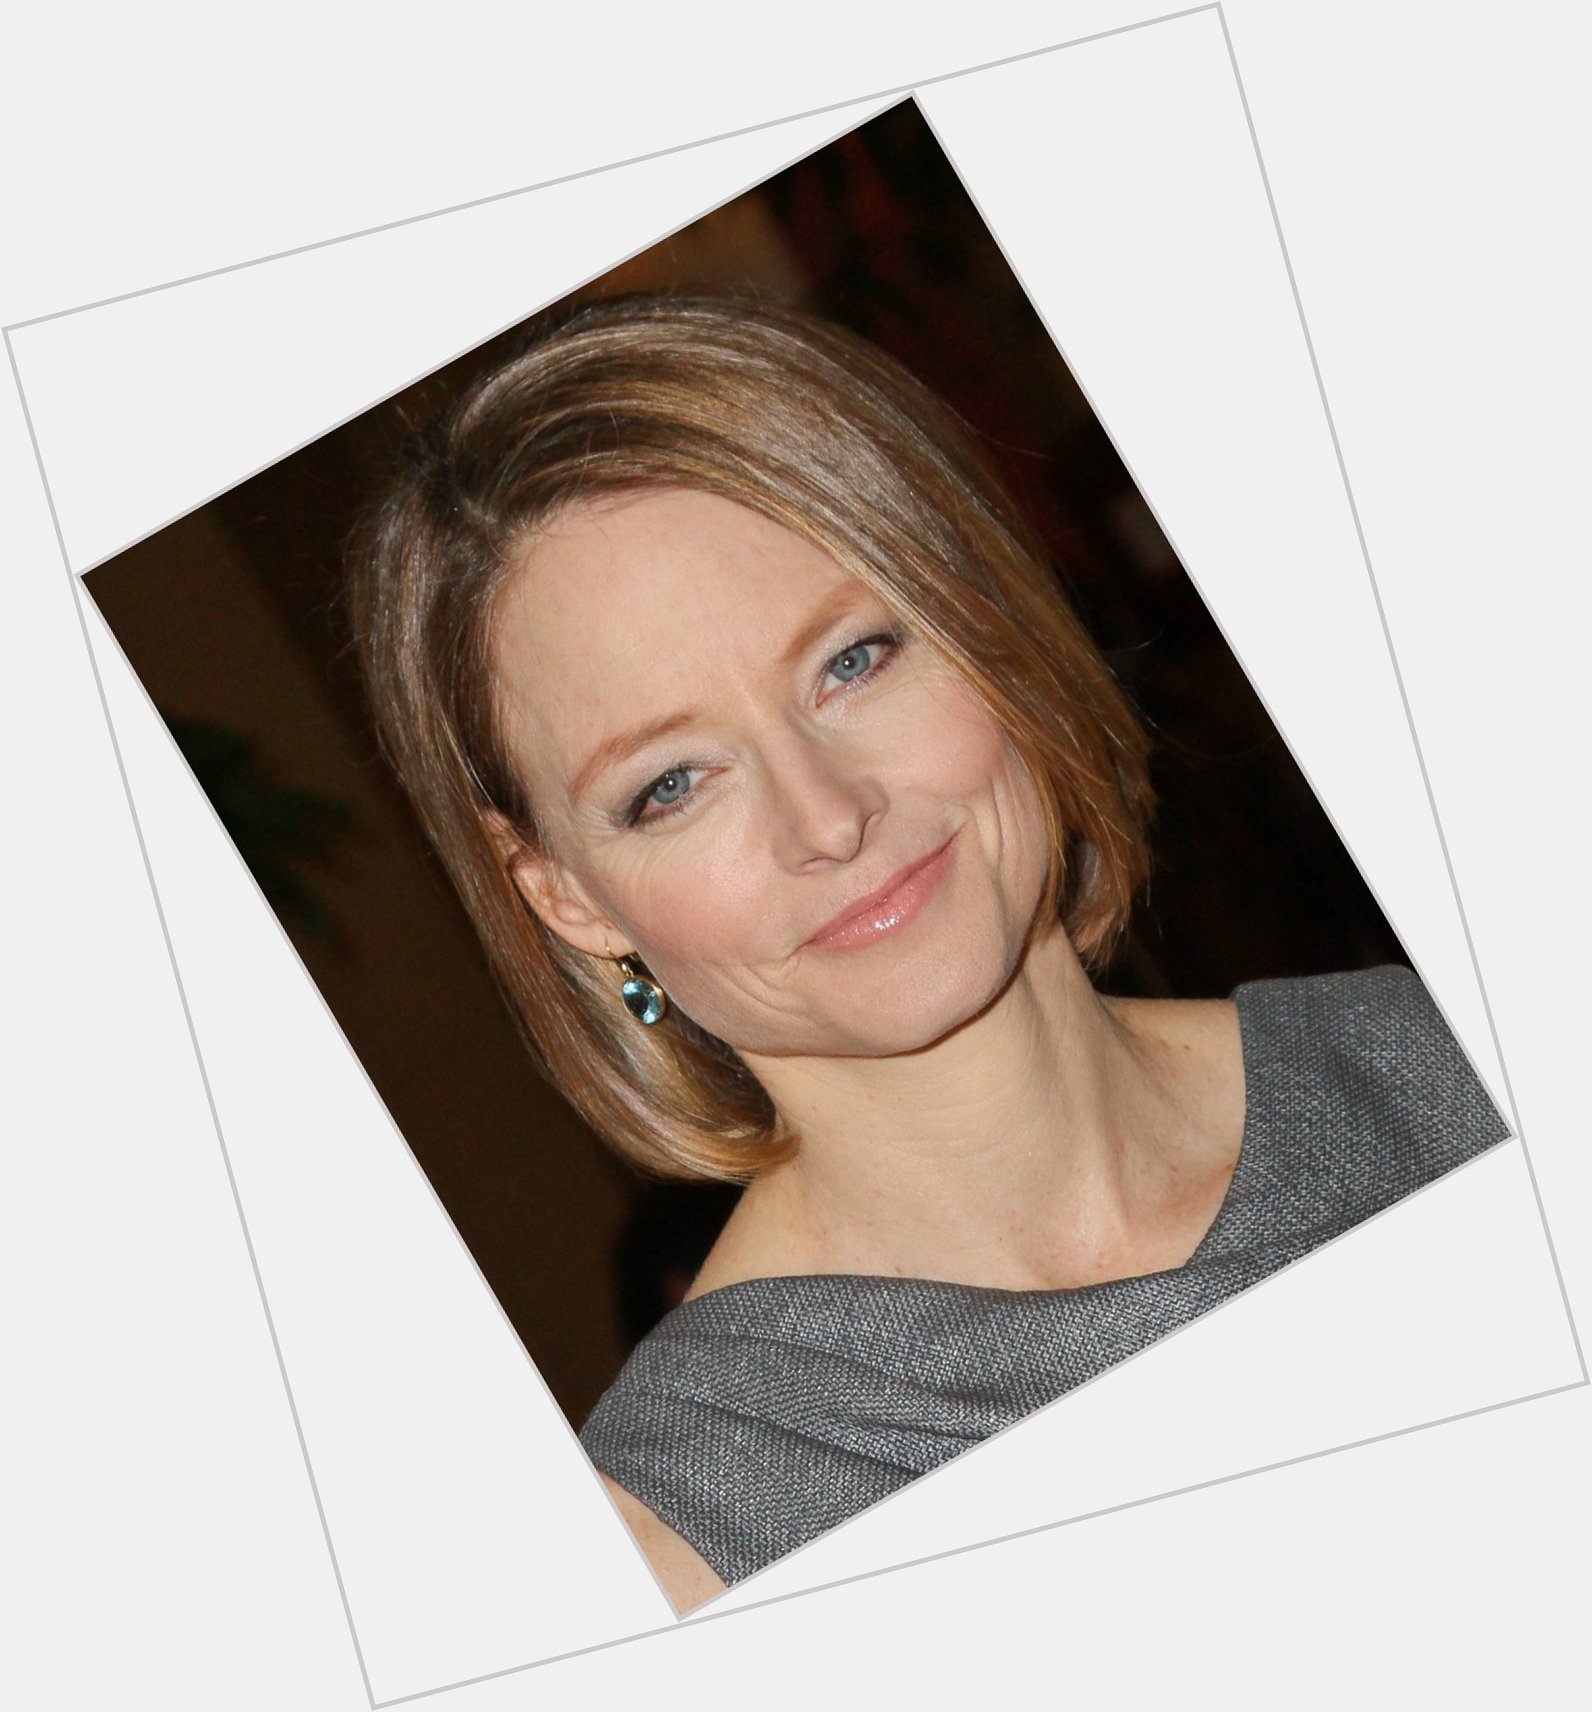  on with wishes Jodie Foster a happy birthday! 